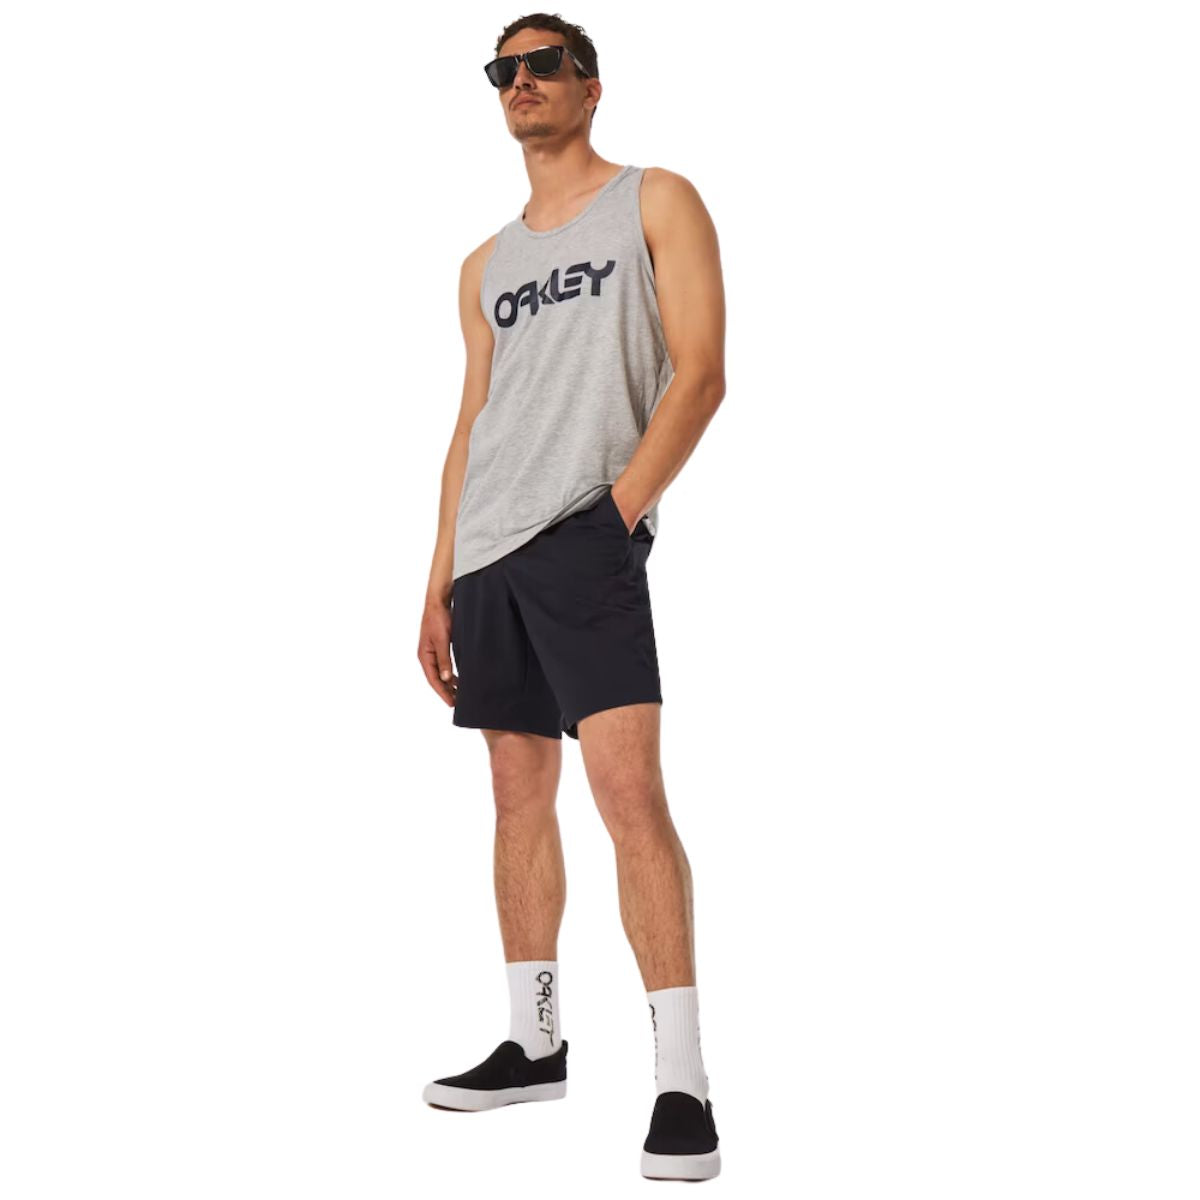 Oakley Shorts In the Moment